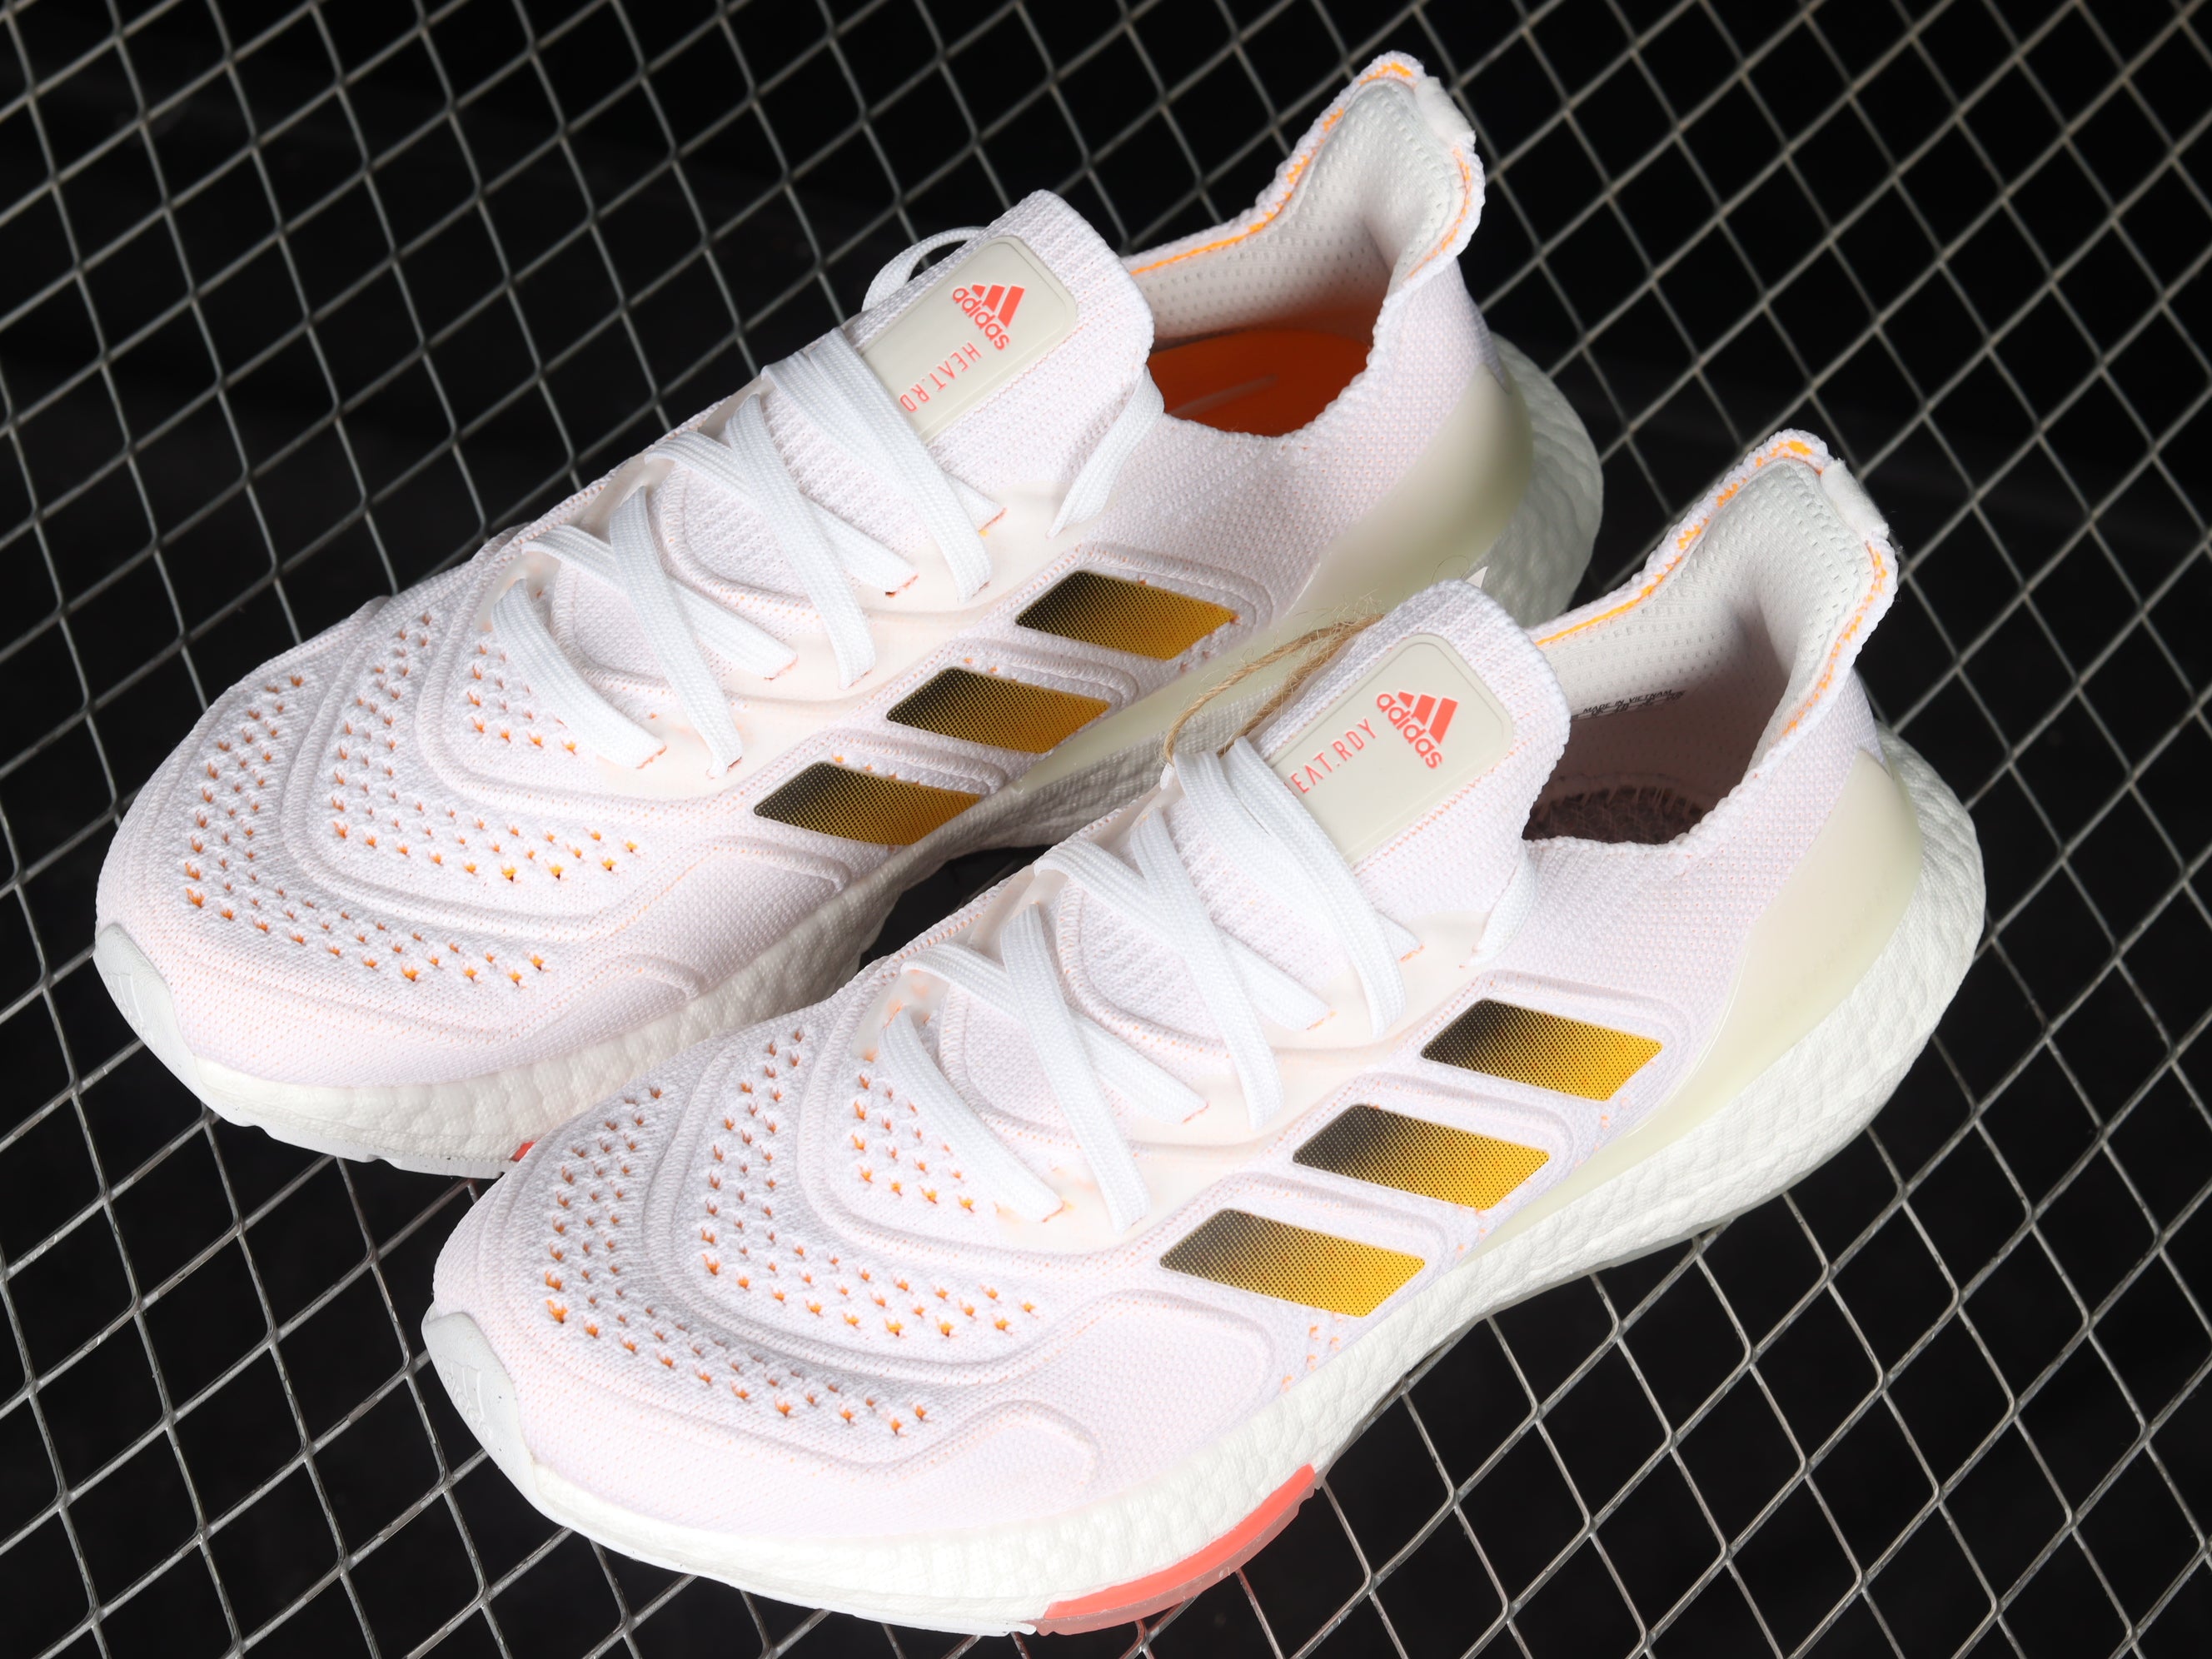 Adidas UltraBoost 22 "Made With Nature" Orange